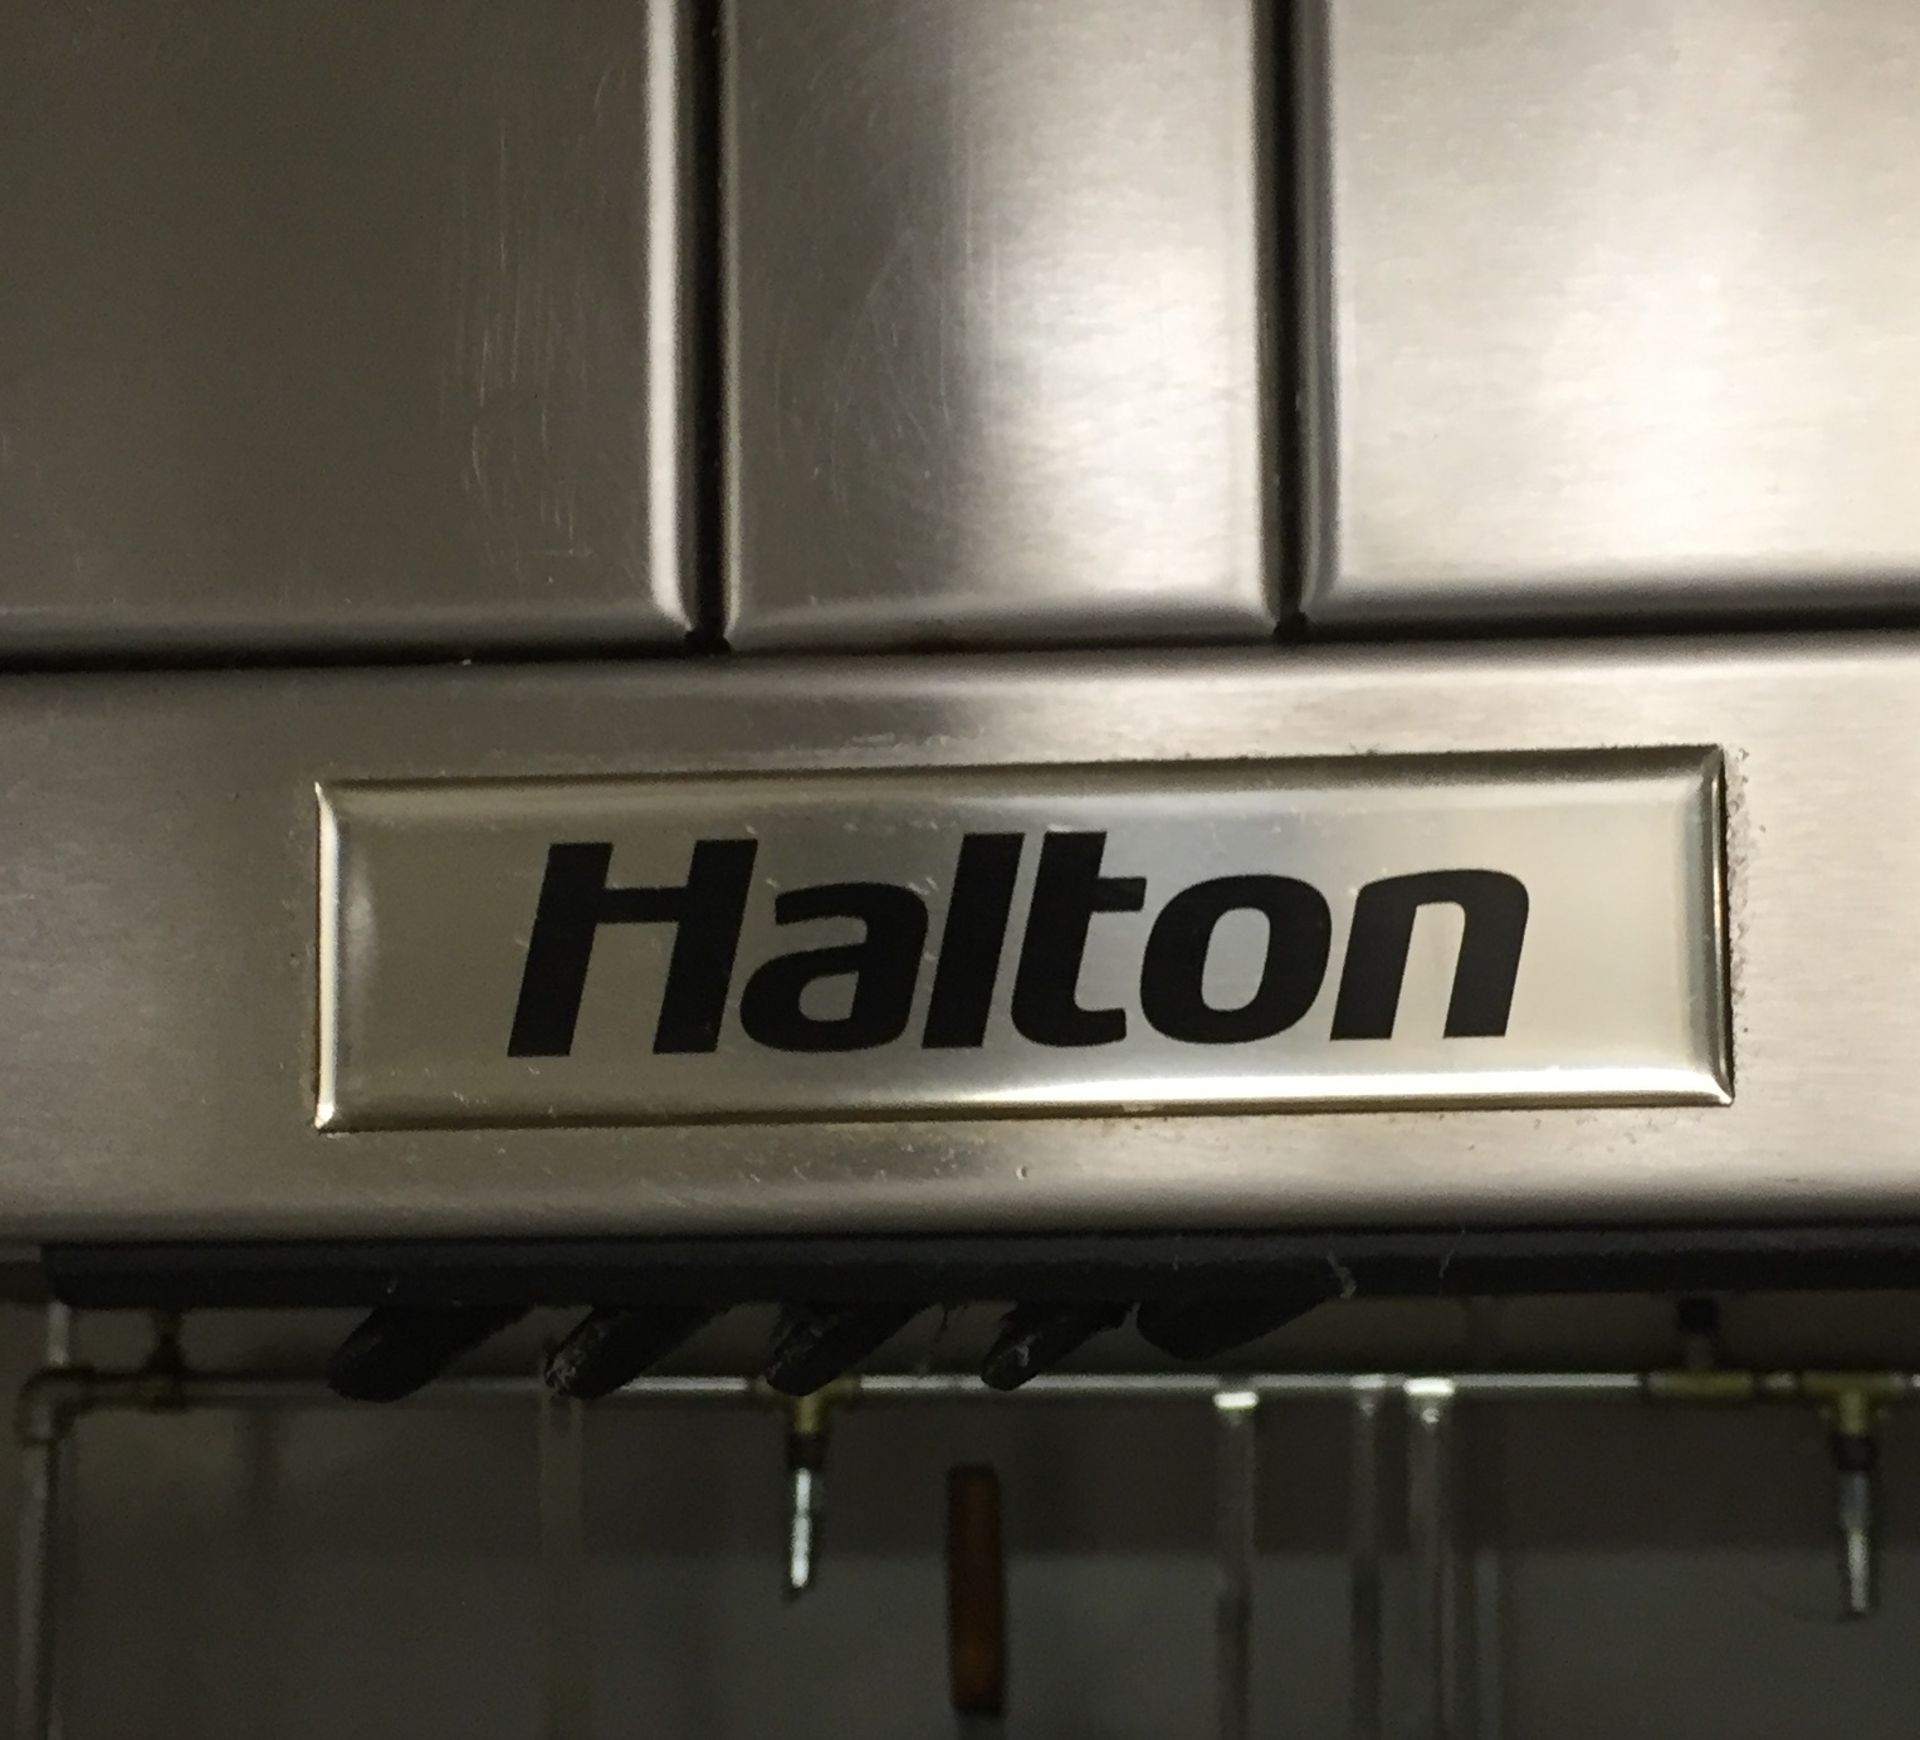 1 x Halton Stainless Steel Commercial Extractor Hood With Filters - Dimensions: 1248cm x 148cm x - Image 4 of 5